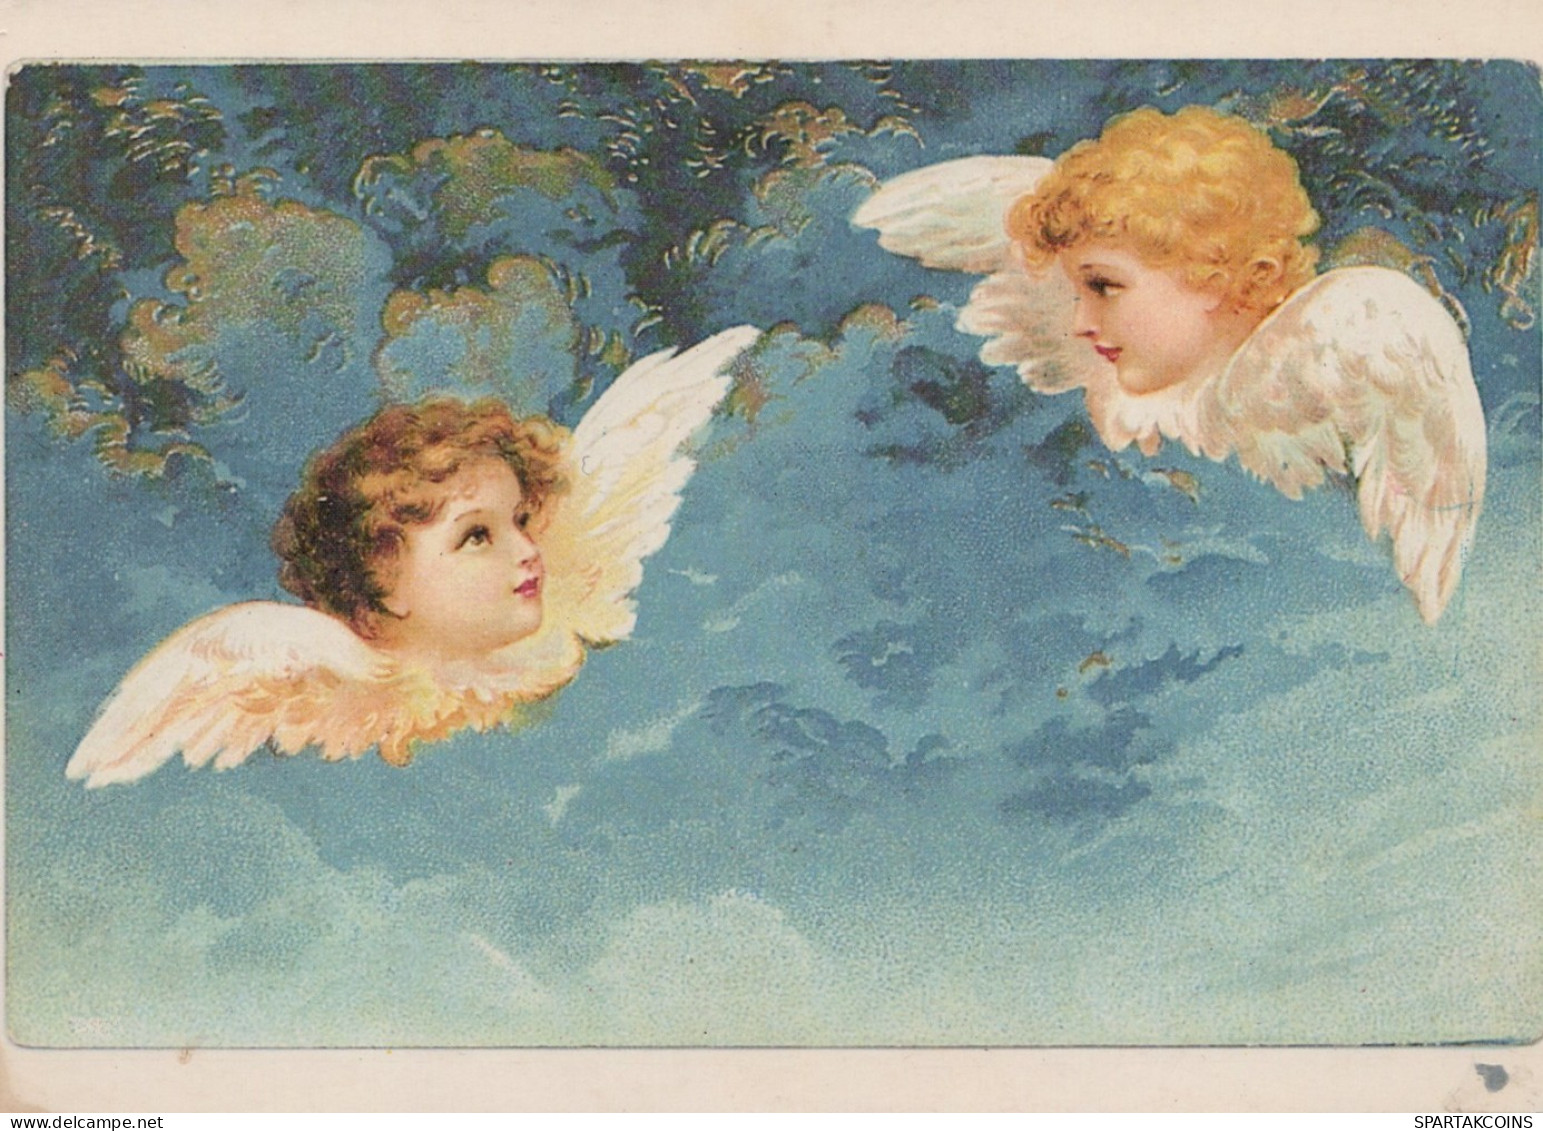 ANGELO Buon Anno Natale Vintage Cartolina CPSM #PAH281.IT - Angels